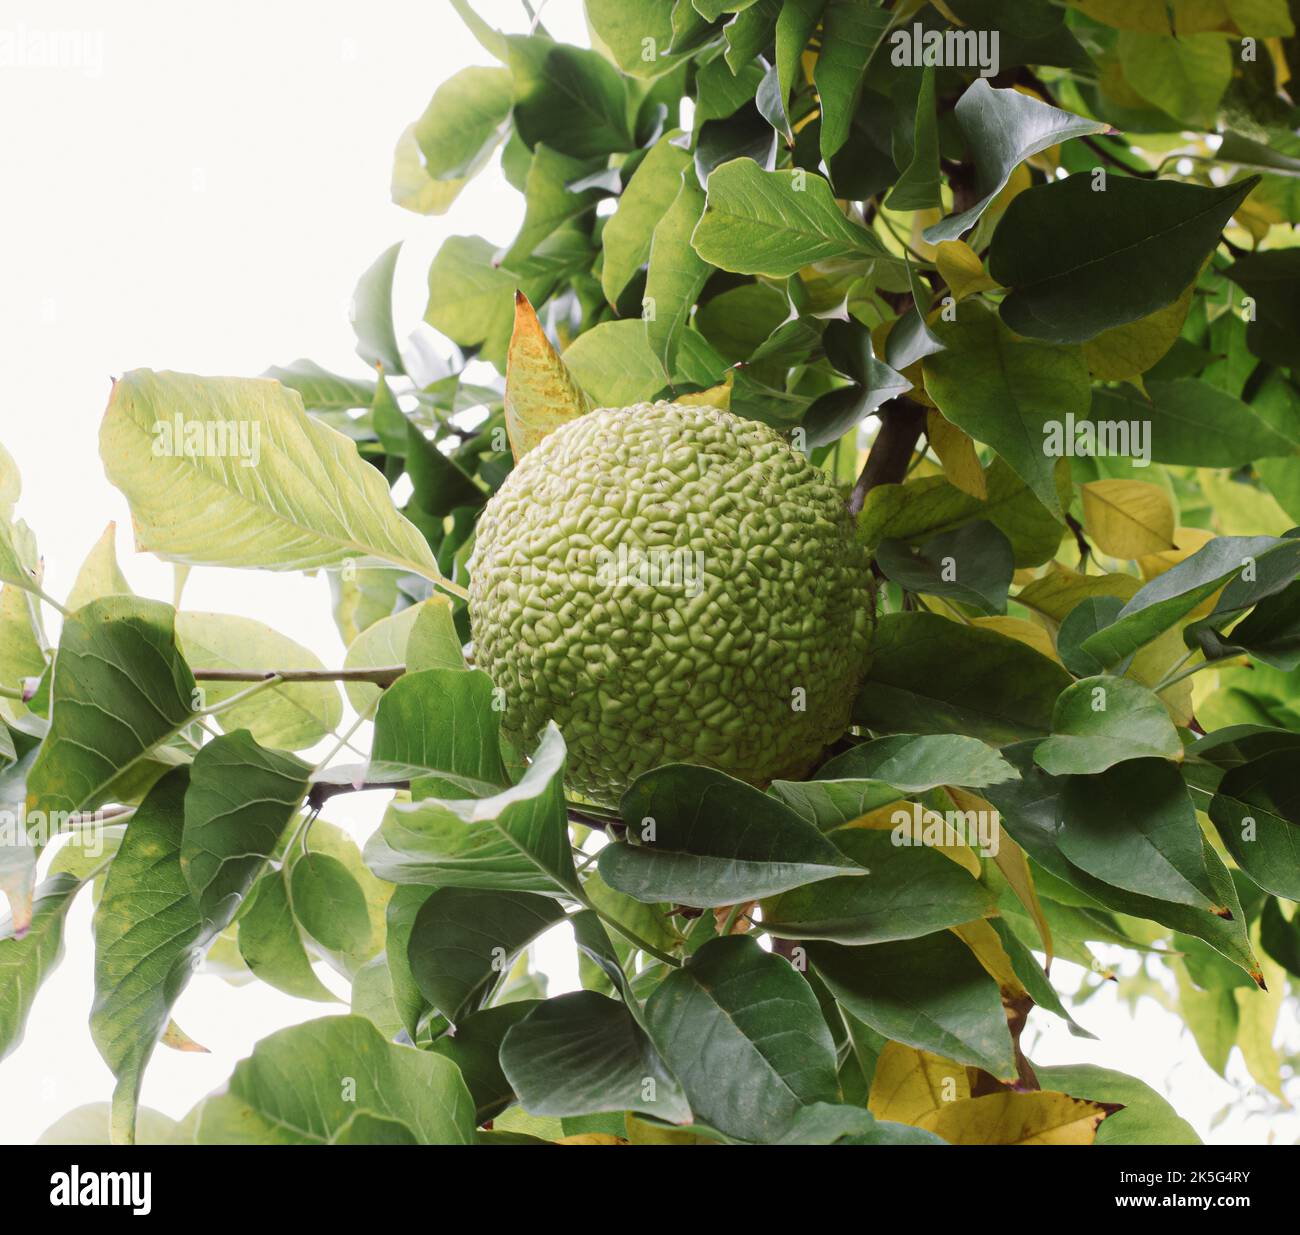 Maclura pomifera fruit of green color on yellow leaves on table. Beige background. Stock Photo